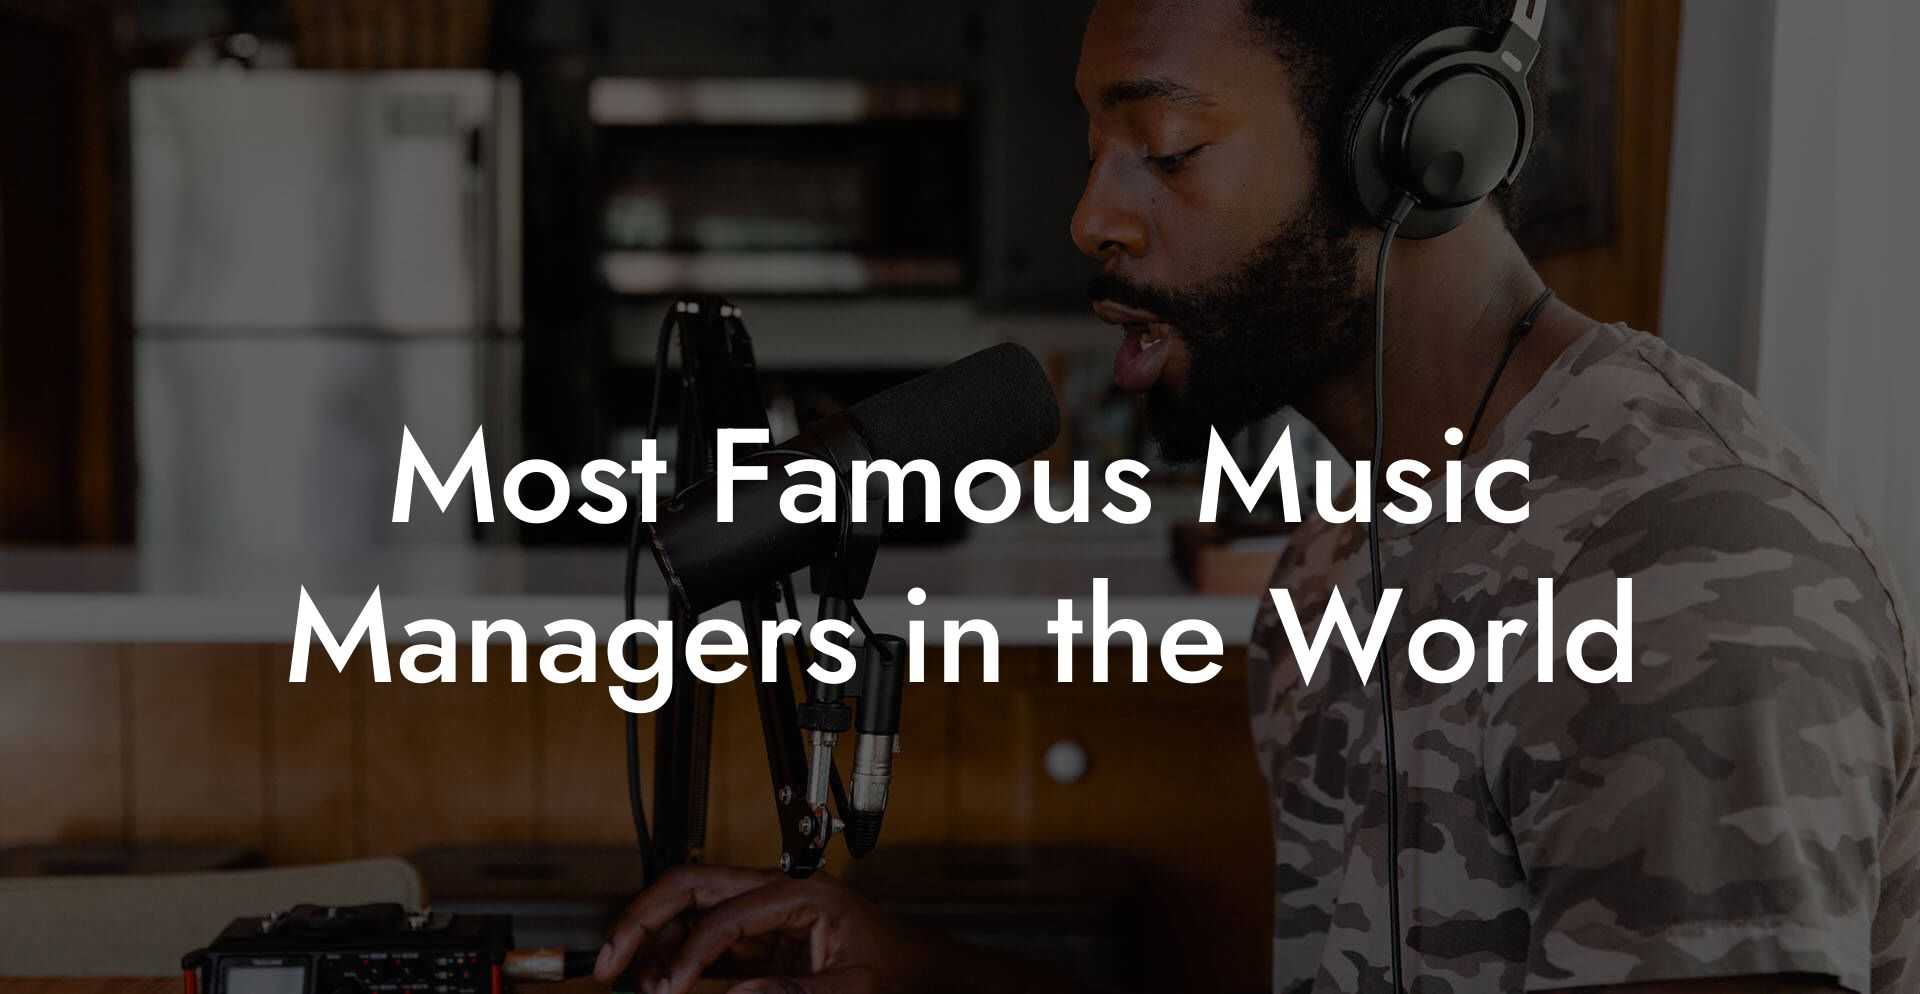 Most Famous Music Managers in the World